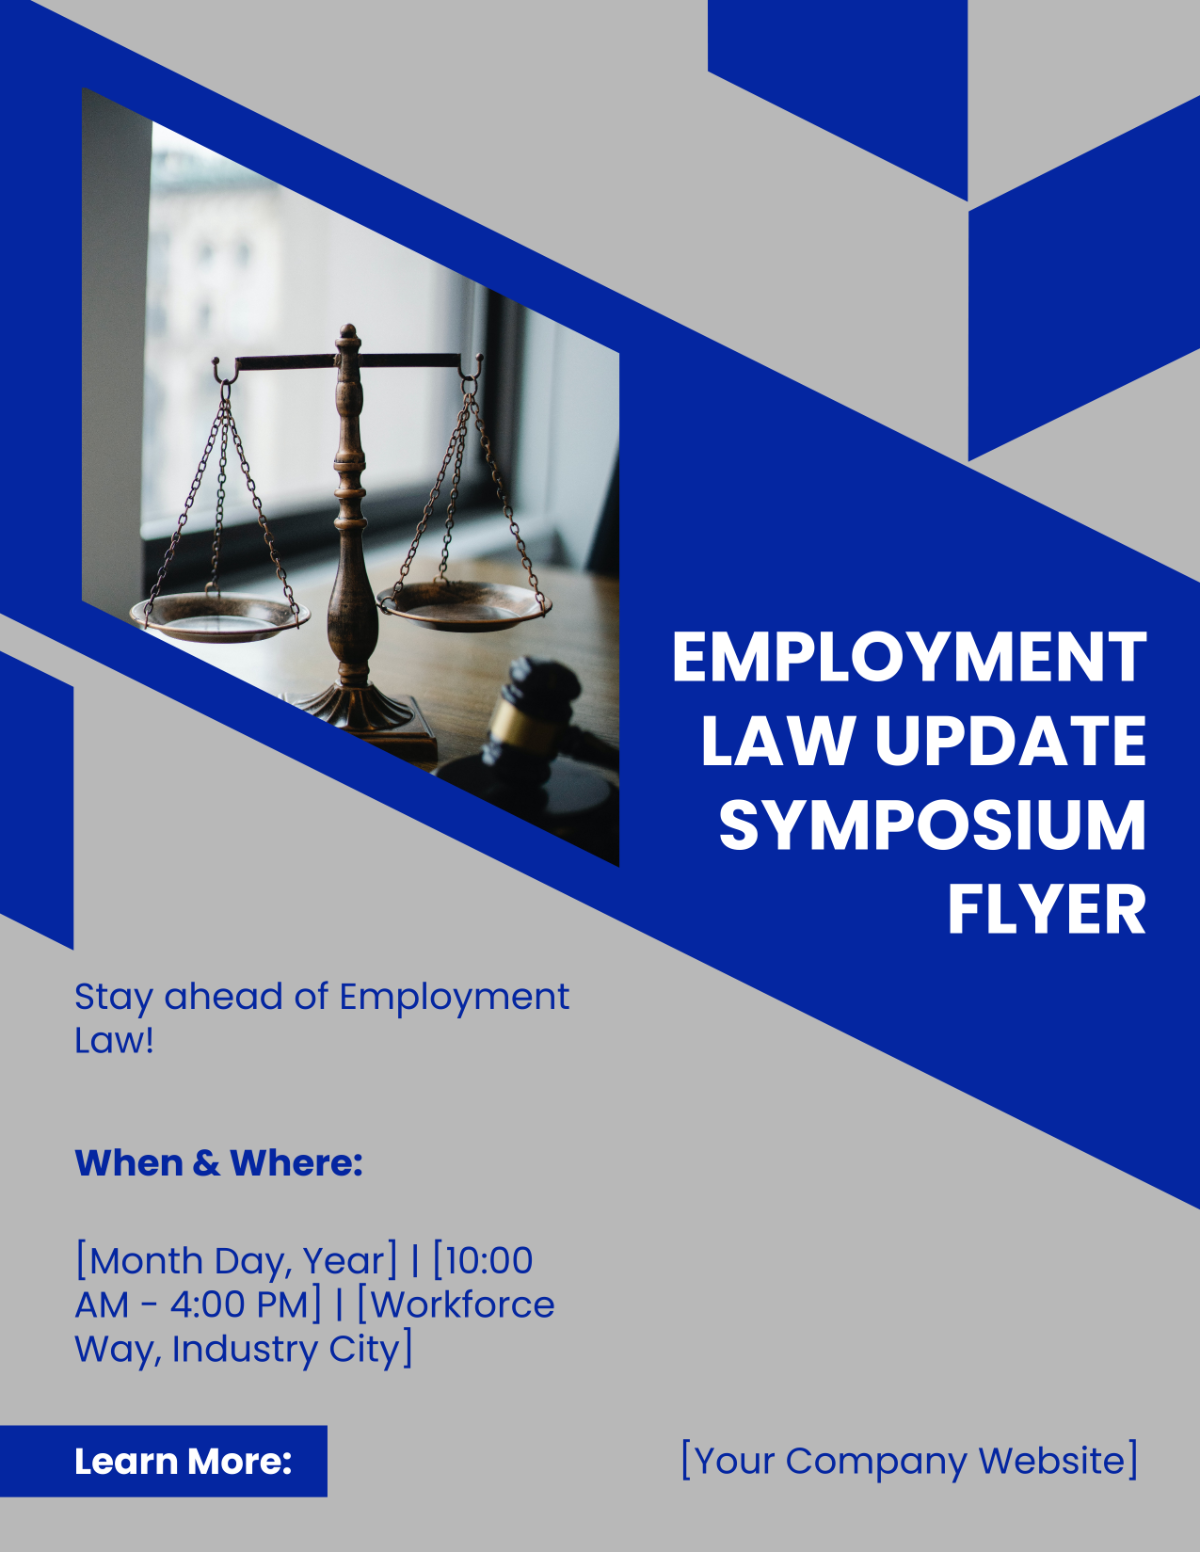 Free Employment Law Update Symposium Flyer Template